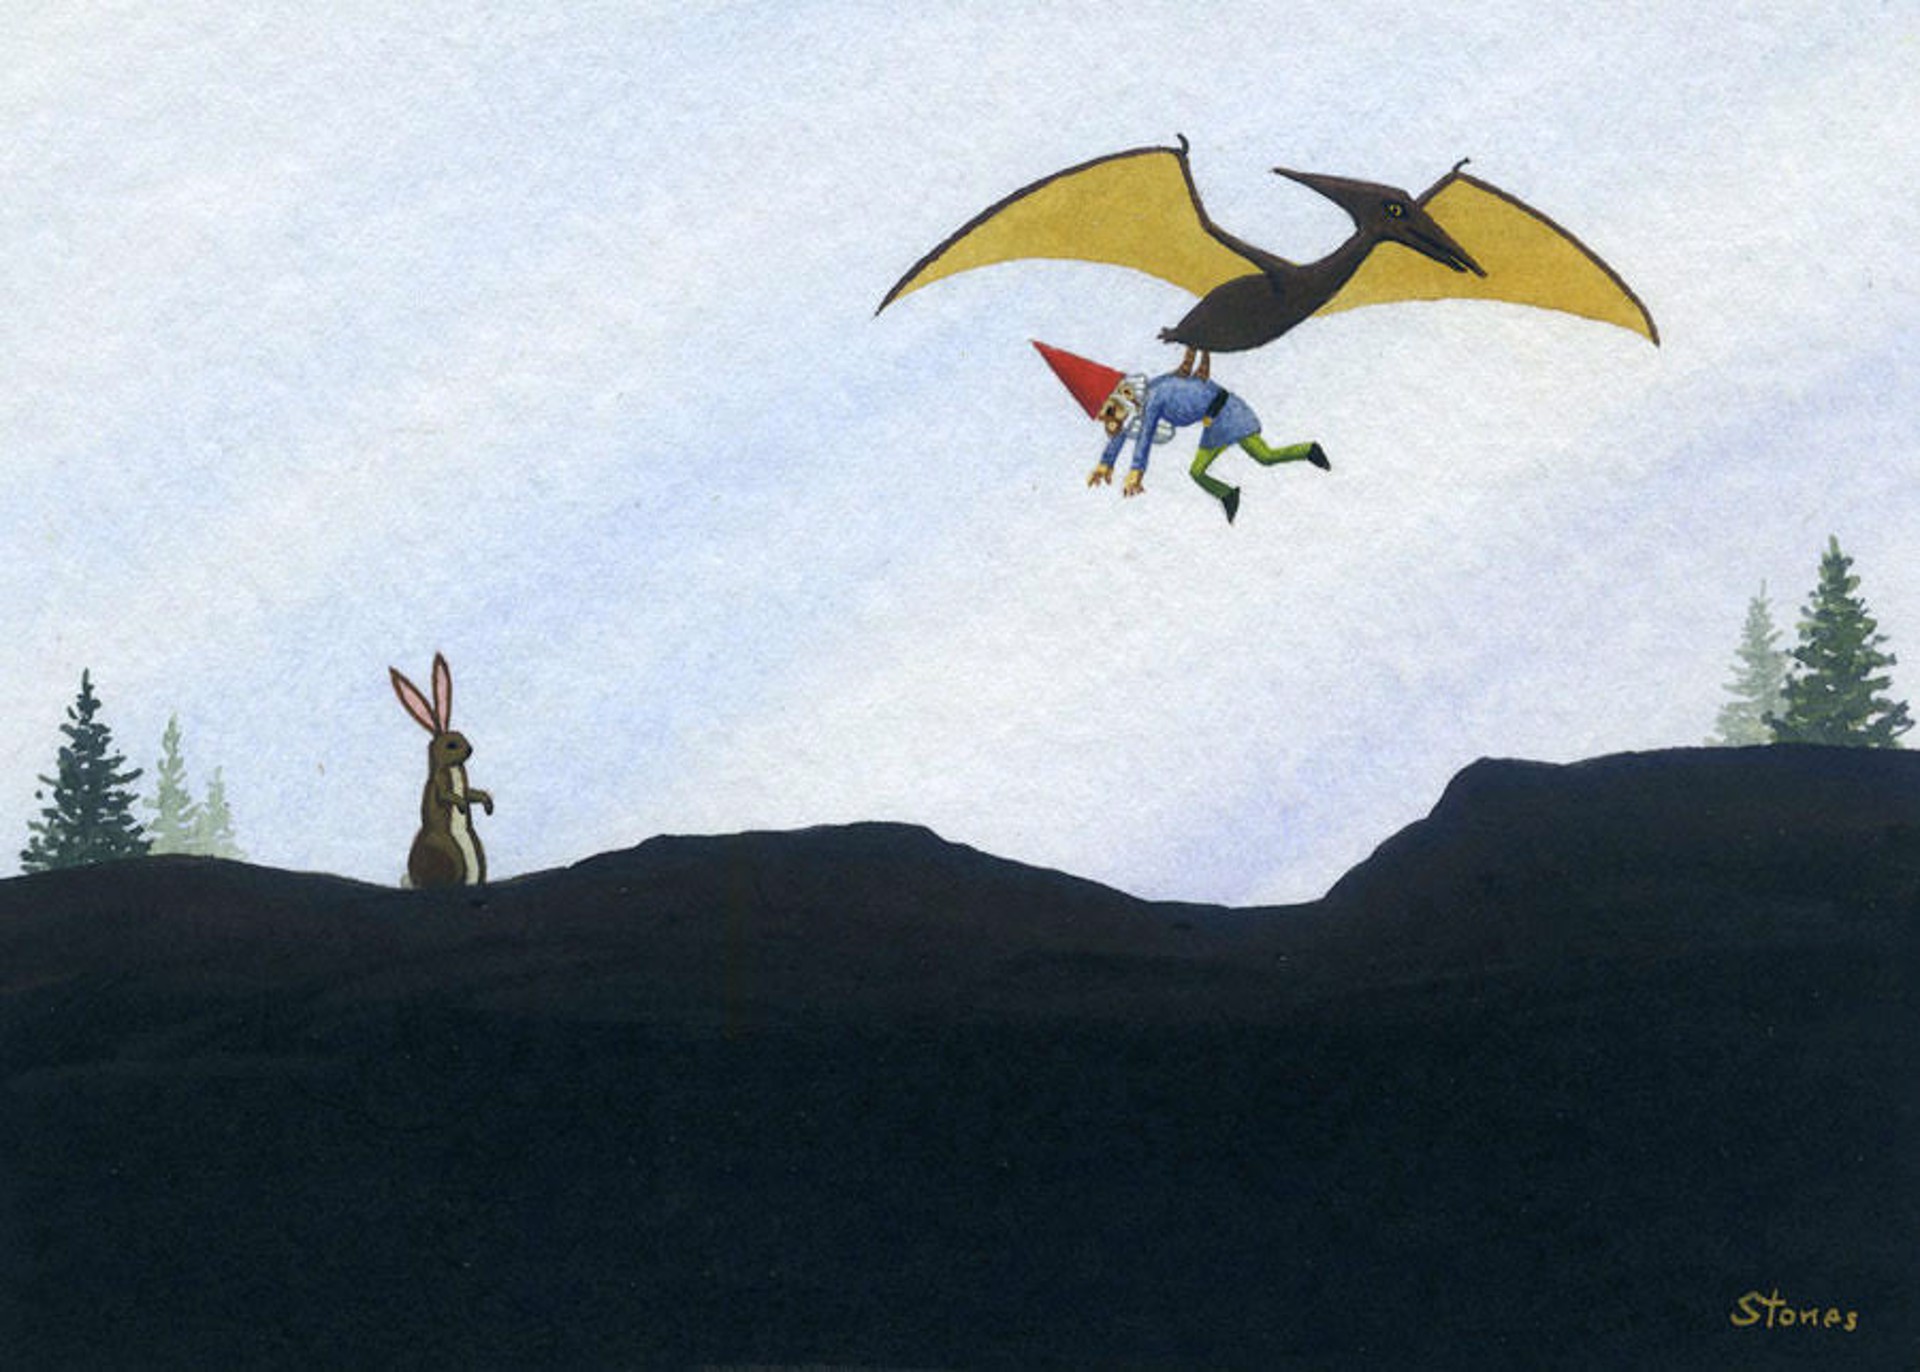 Pterodactyl Grabs Gnome by Greg Stones